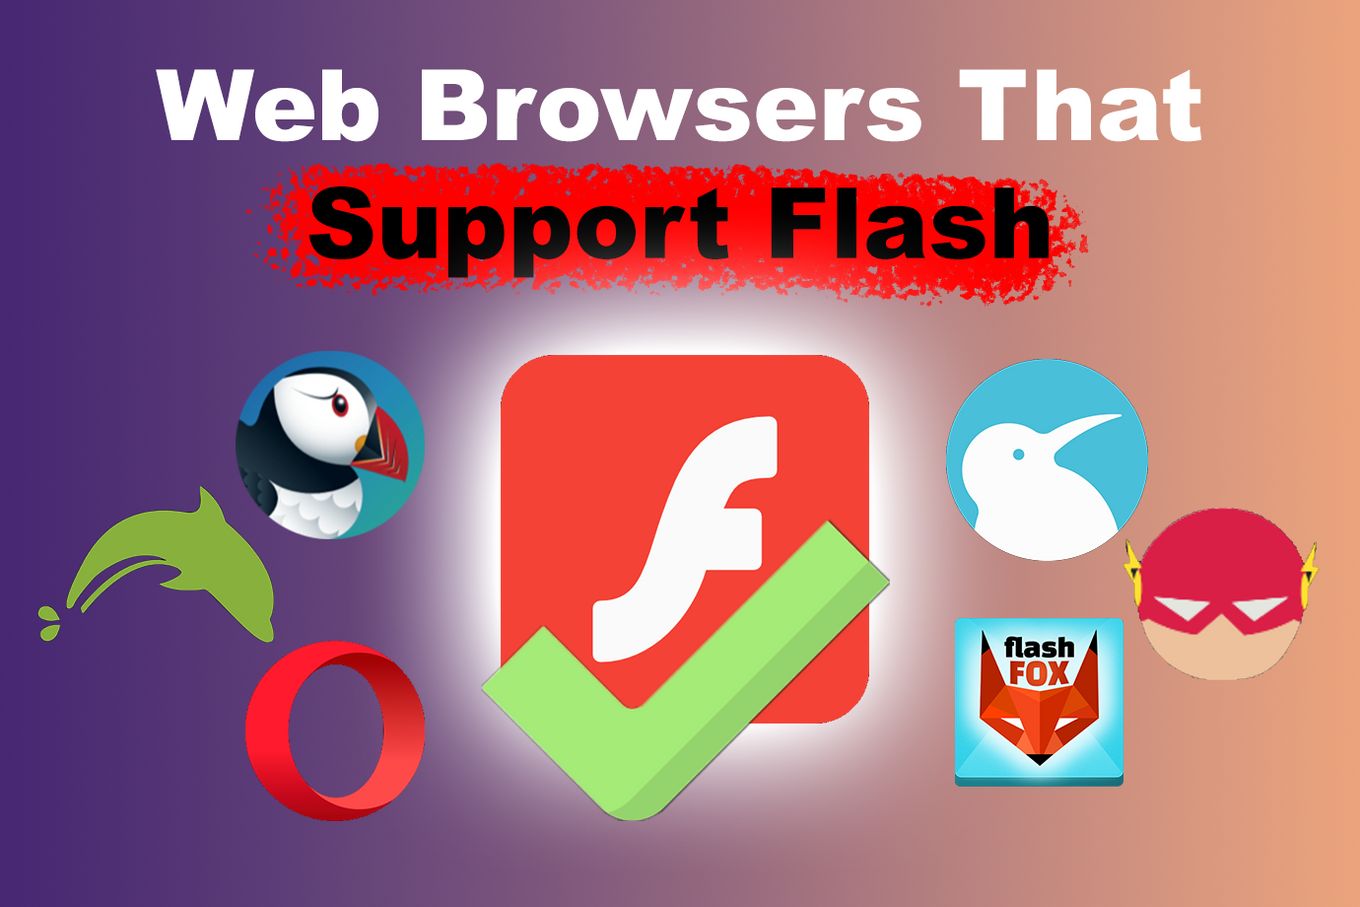 Web Browsers That Support Flash